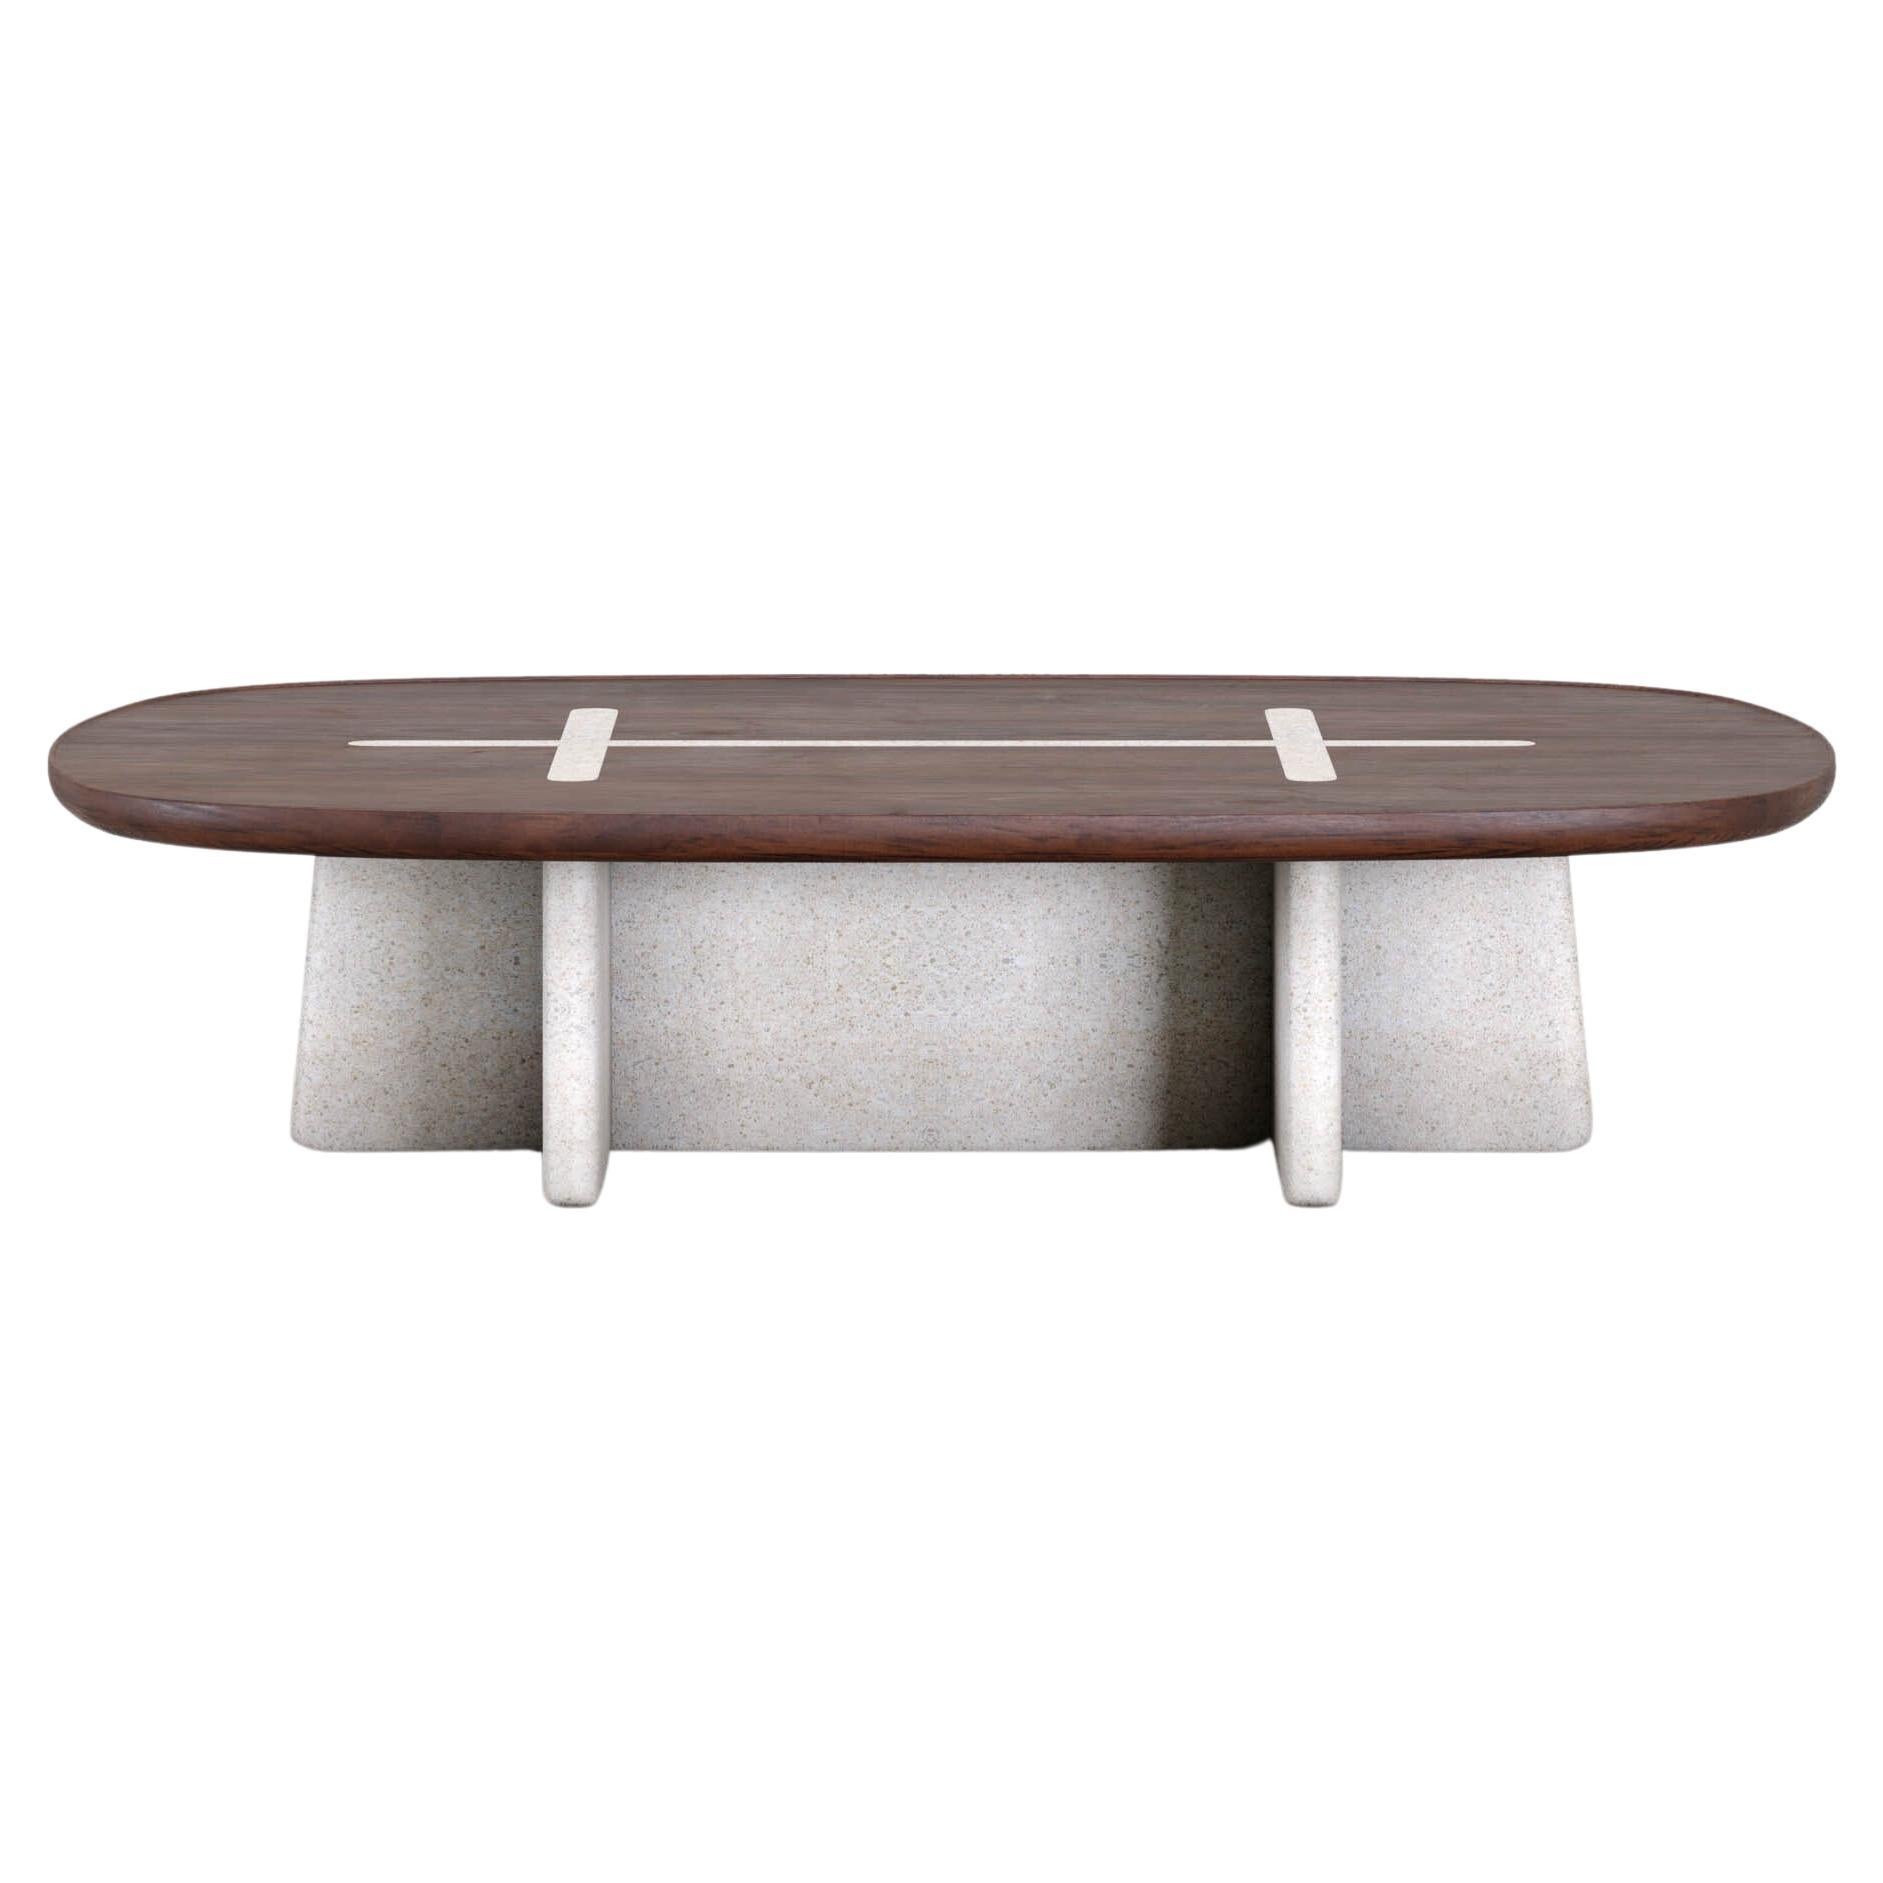 Contemporary Coffee Table 'Bleecker Street' by Man Of Parts, 160 cm, Whiskey Oak & Sandstone For Sale